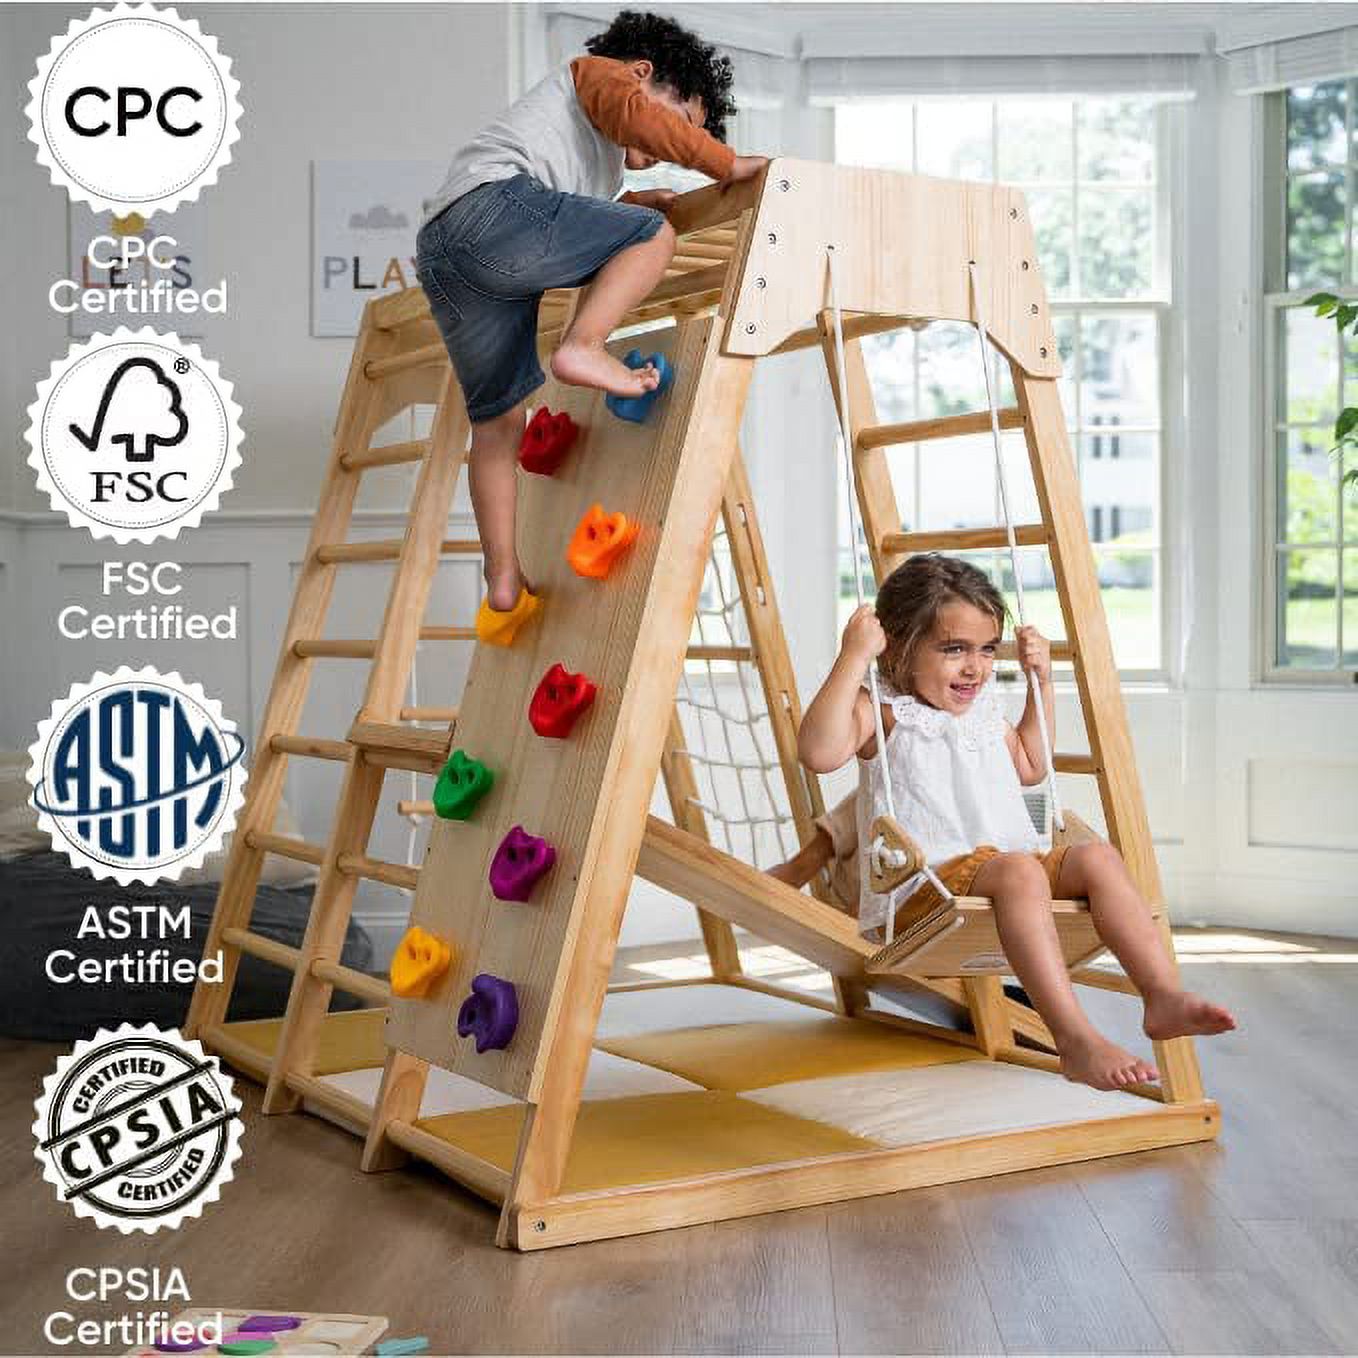 Avenlur Magnolia Indoor Playground 6-in-1 Jungle Gym Montessori Waldorf Style Wooden Climber Playset Slide, Rock Climbing Wall, Rope Wall Climber, Monkey Bars, Swing for Toddlers, Children Kids 2-6yrs - image 3 of 9